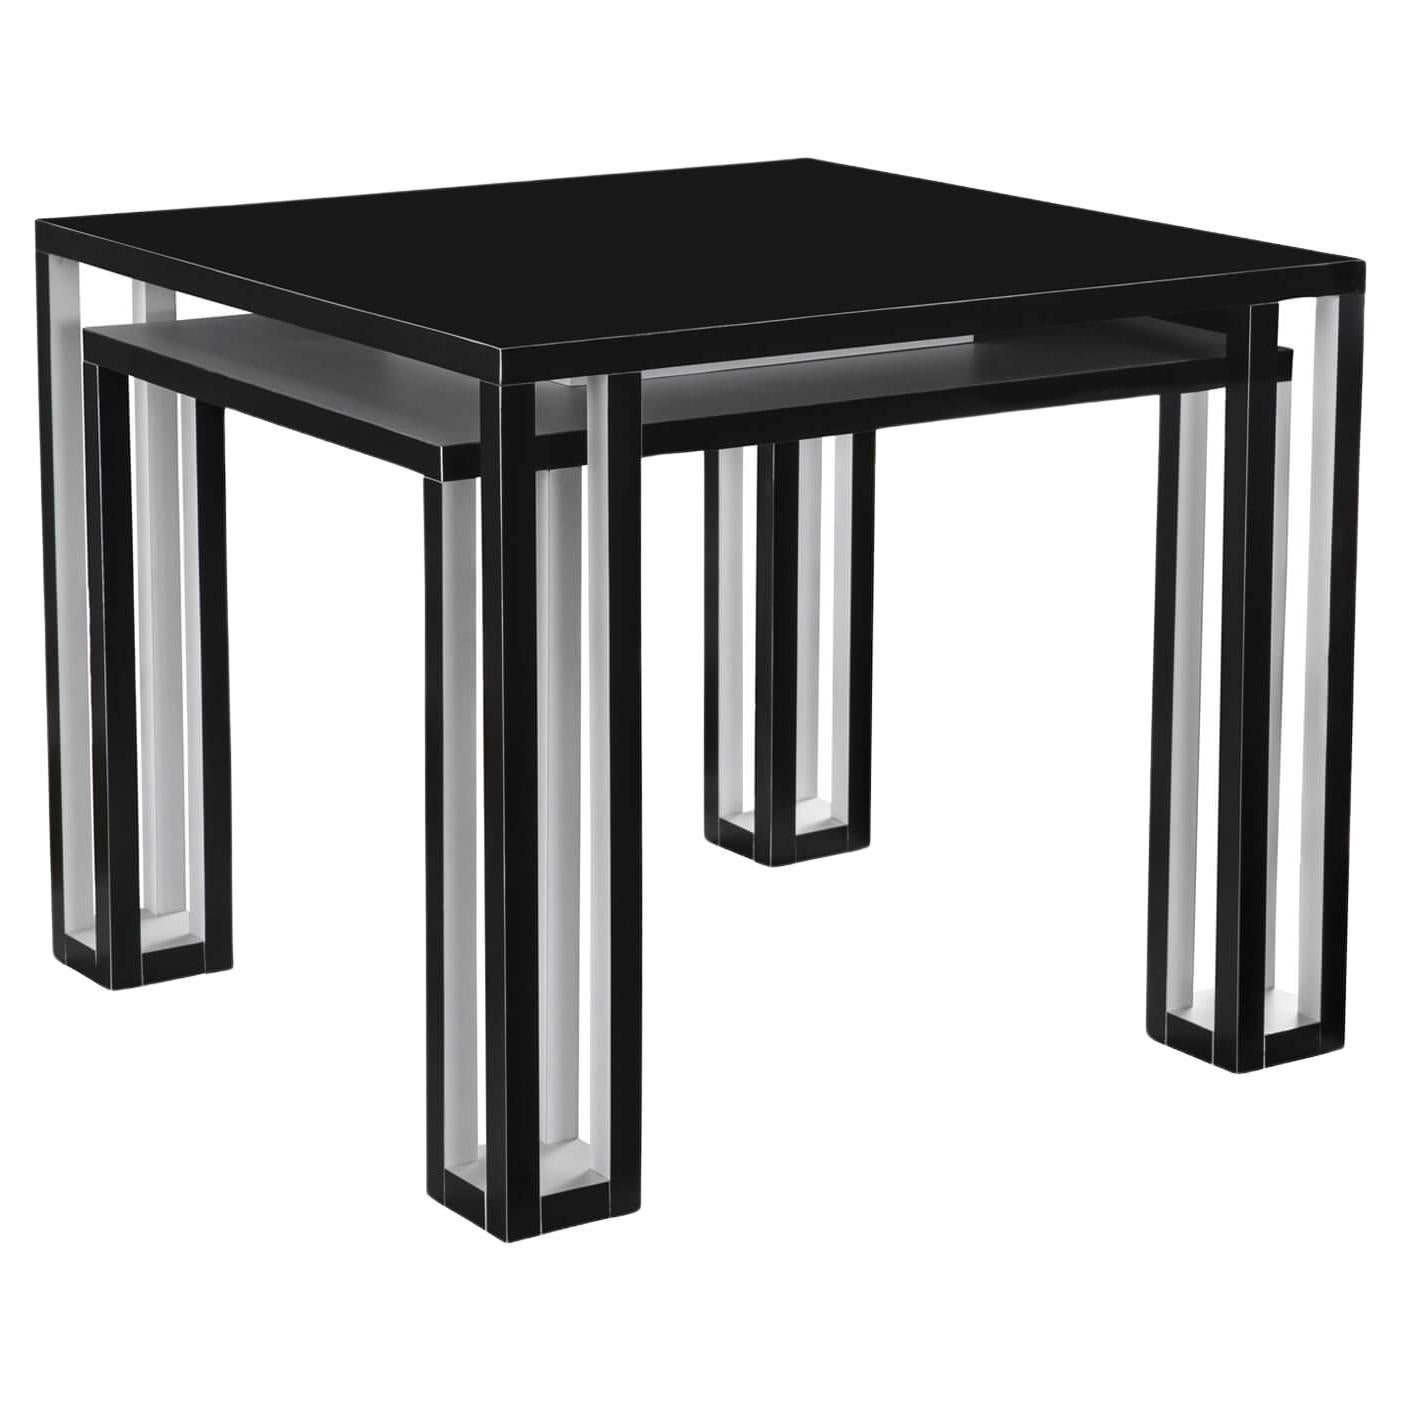 Black & White Table For Sale